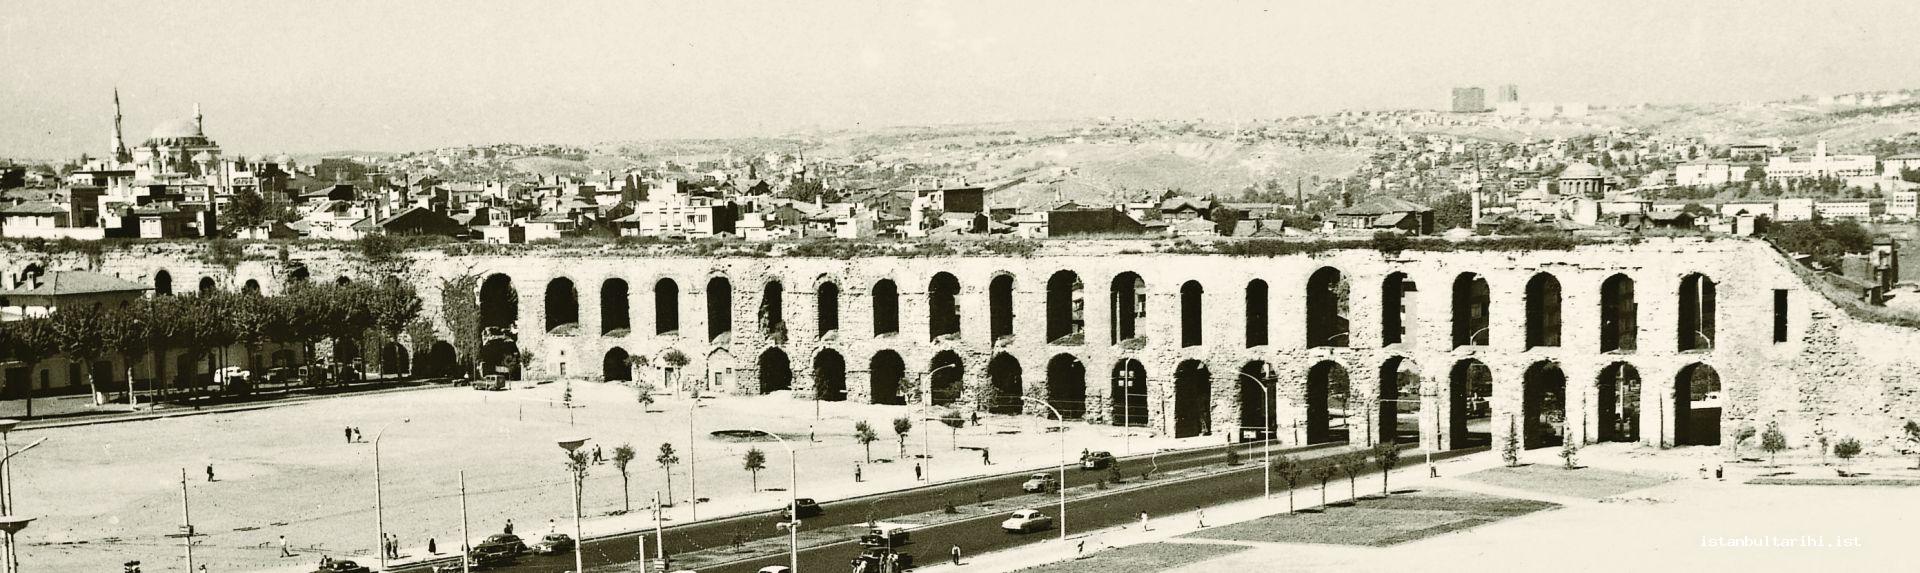 2- The view of Valens Aqueduct and Fatih district from the side of the building of Istanbul Metropolitan Municipality. Fatih Mosque is seen on the left side.The cone on one of its minarets is broken down.